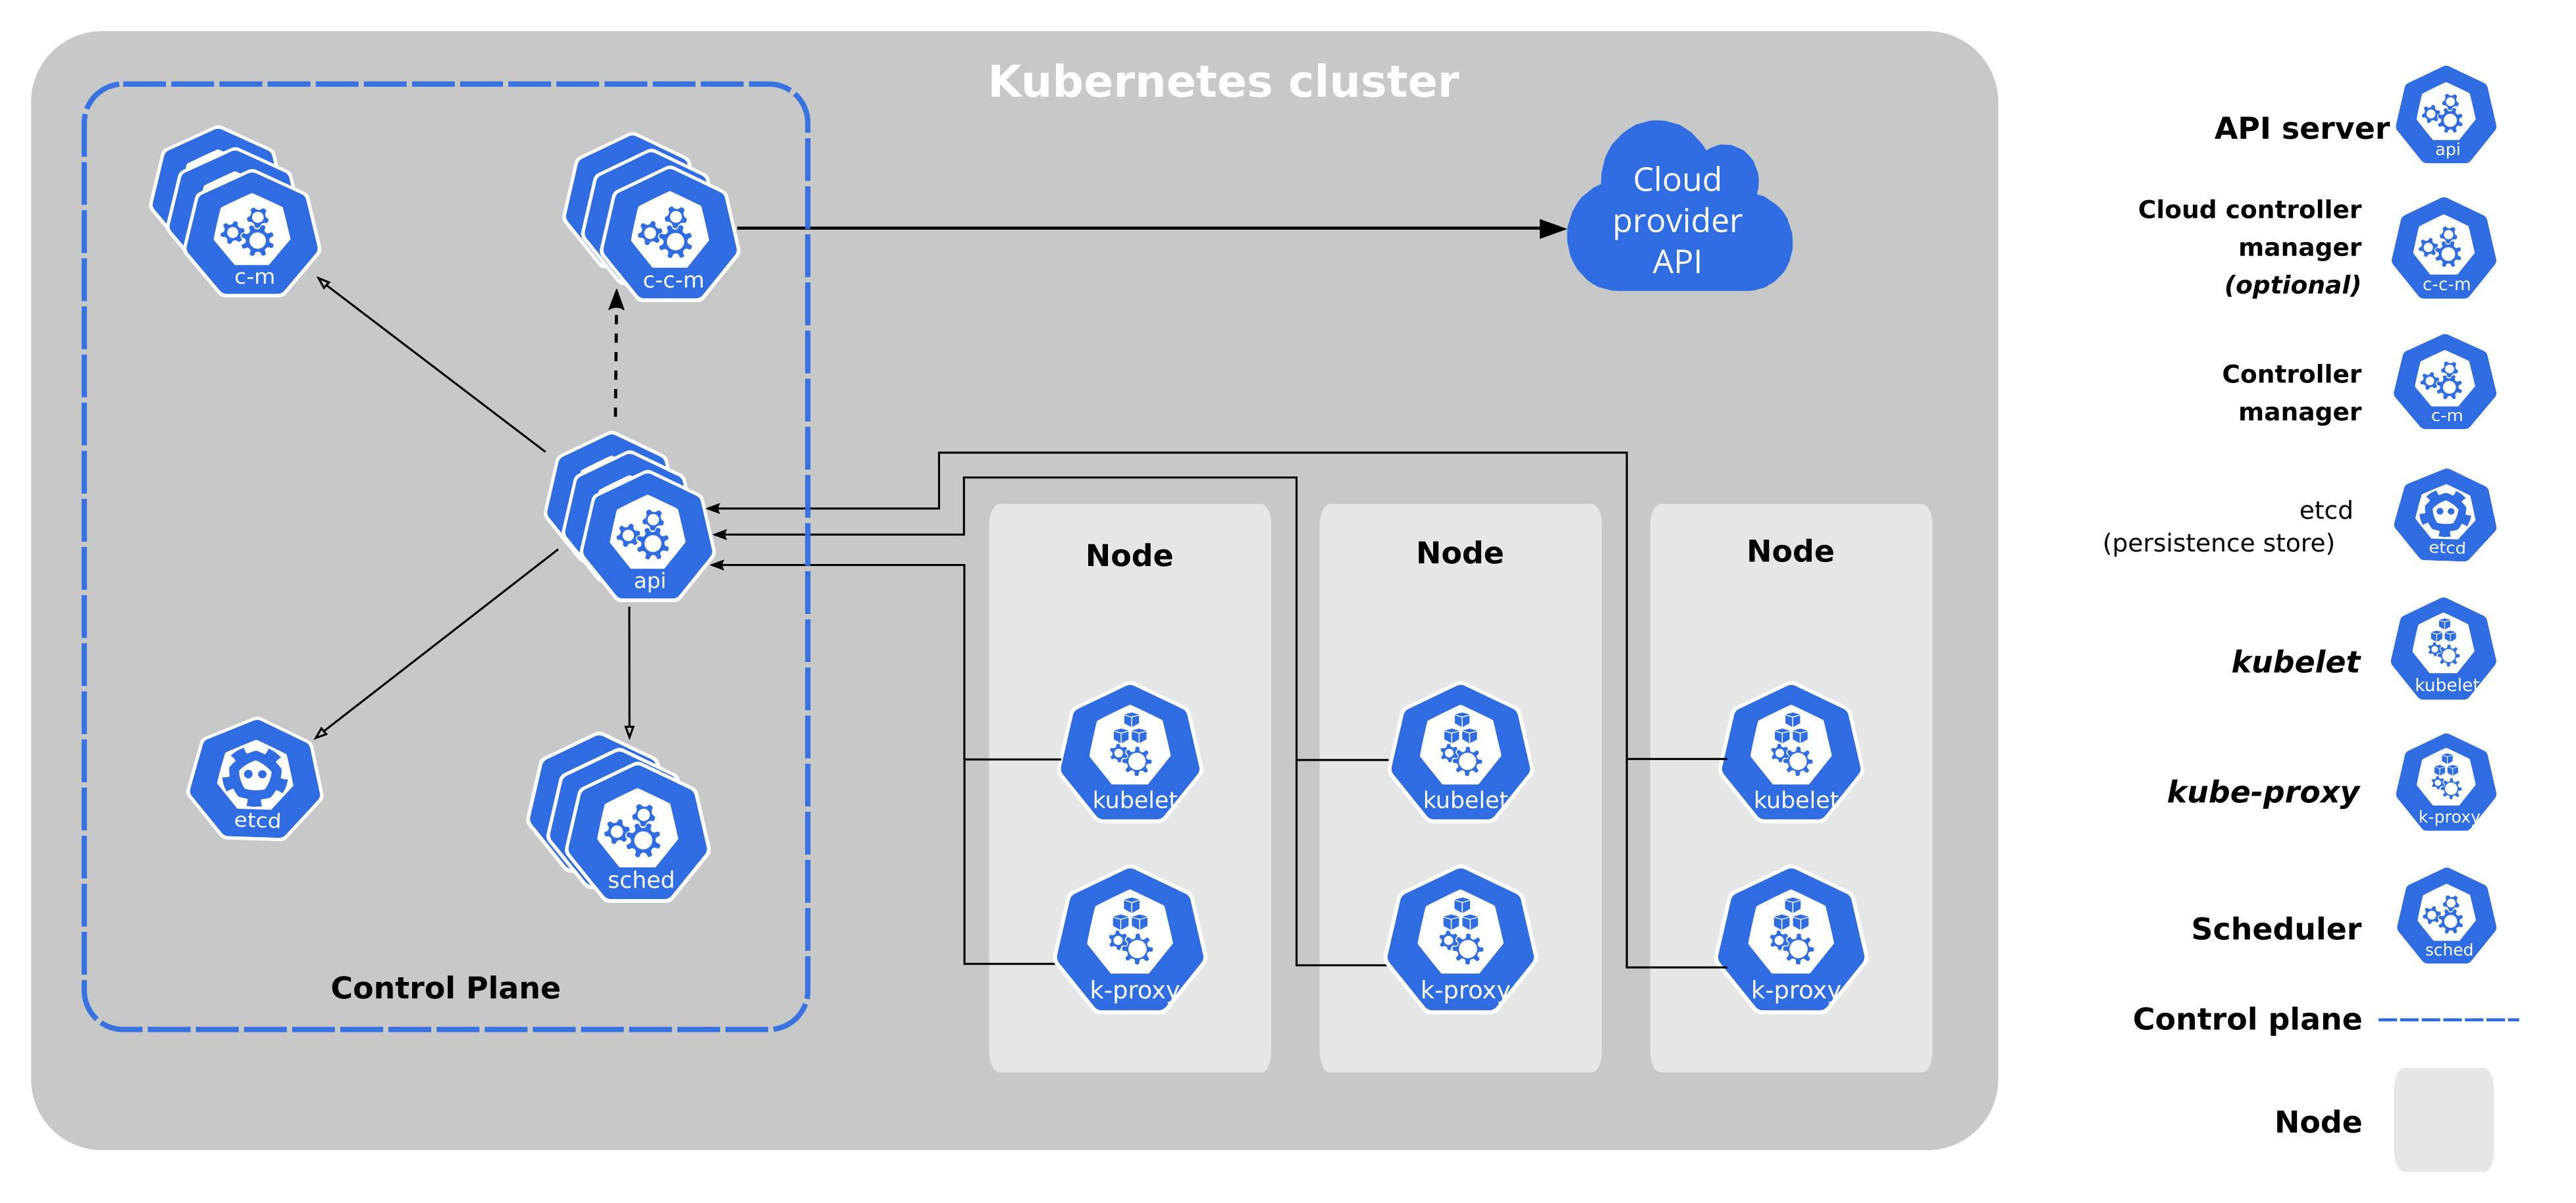 arch-1.19-components-of-kubernetes.jpg